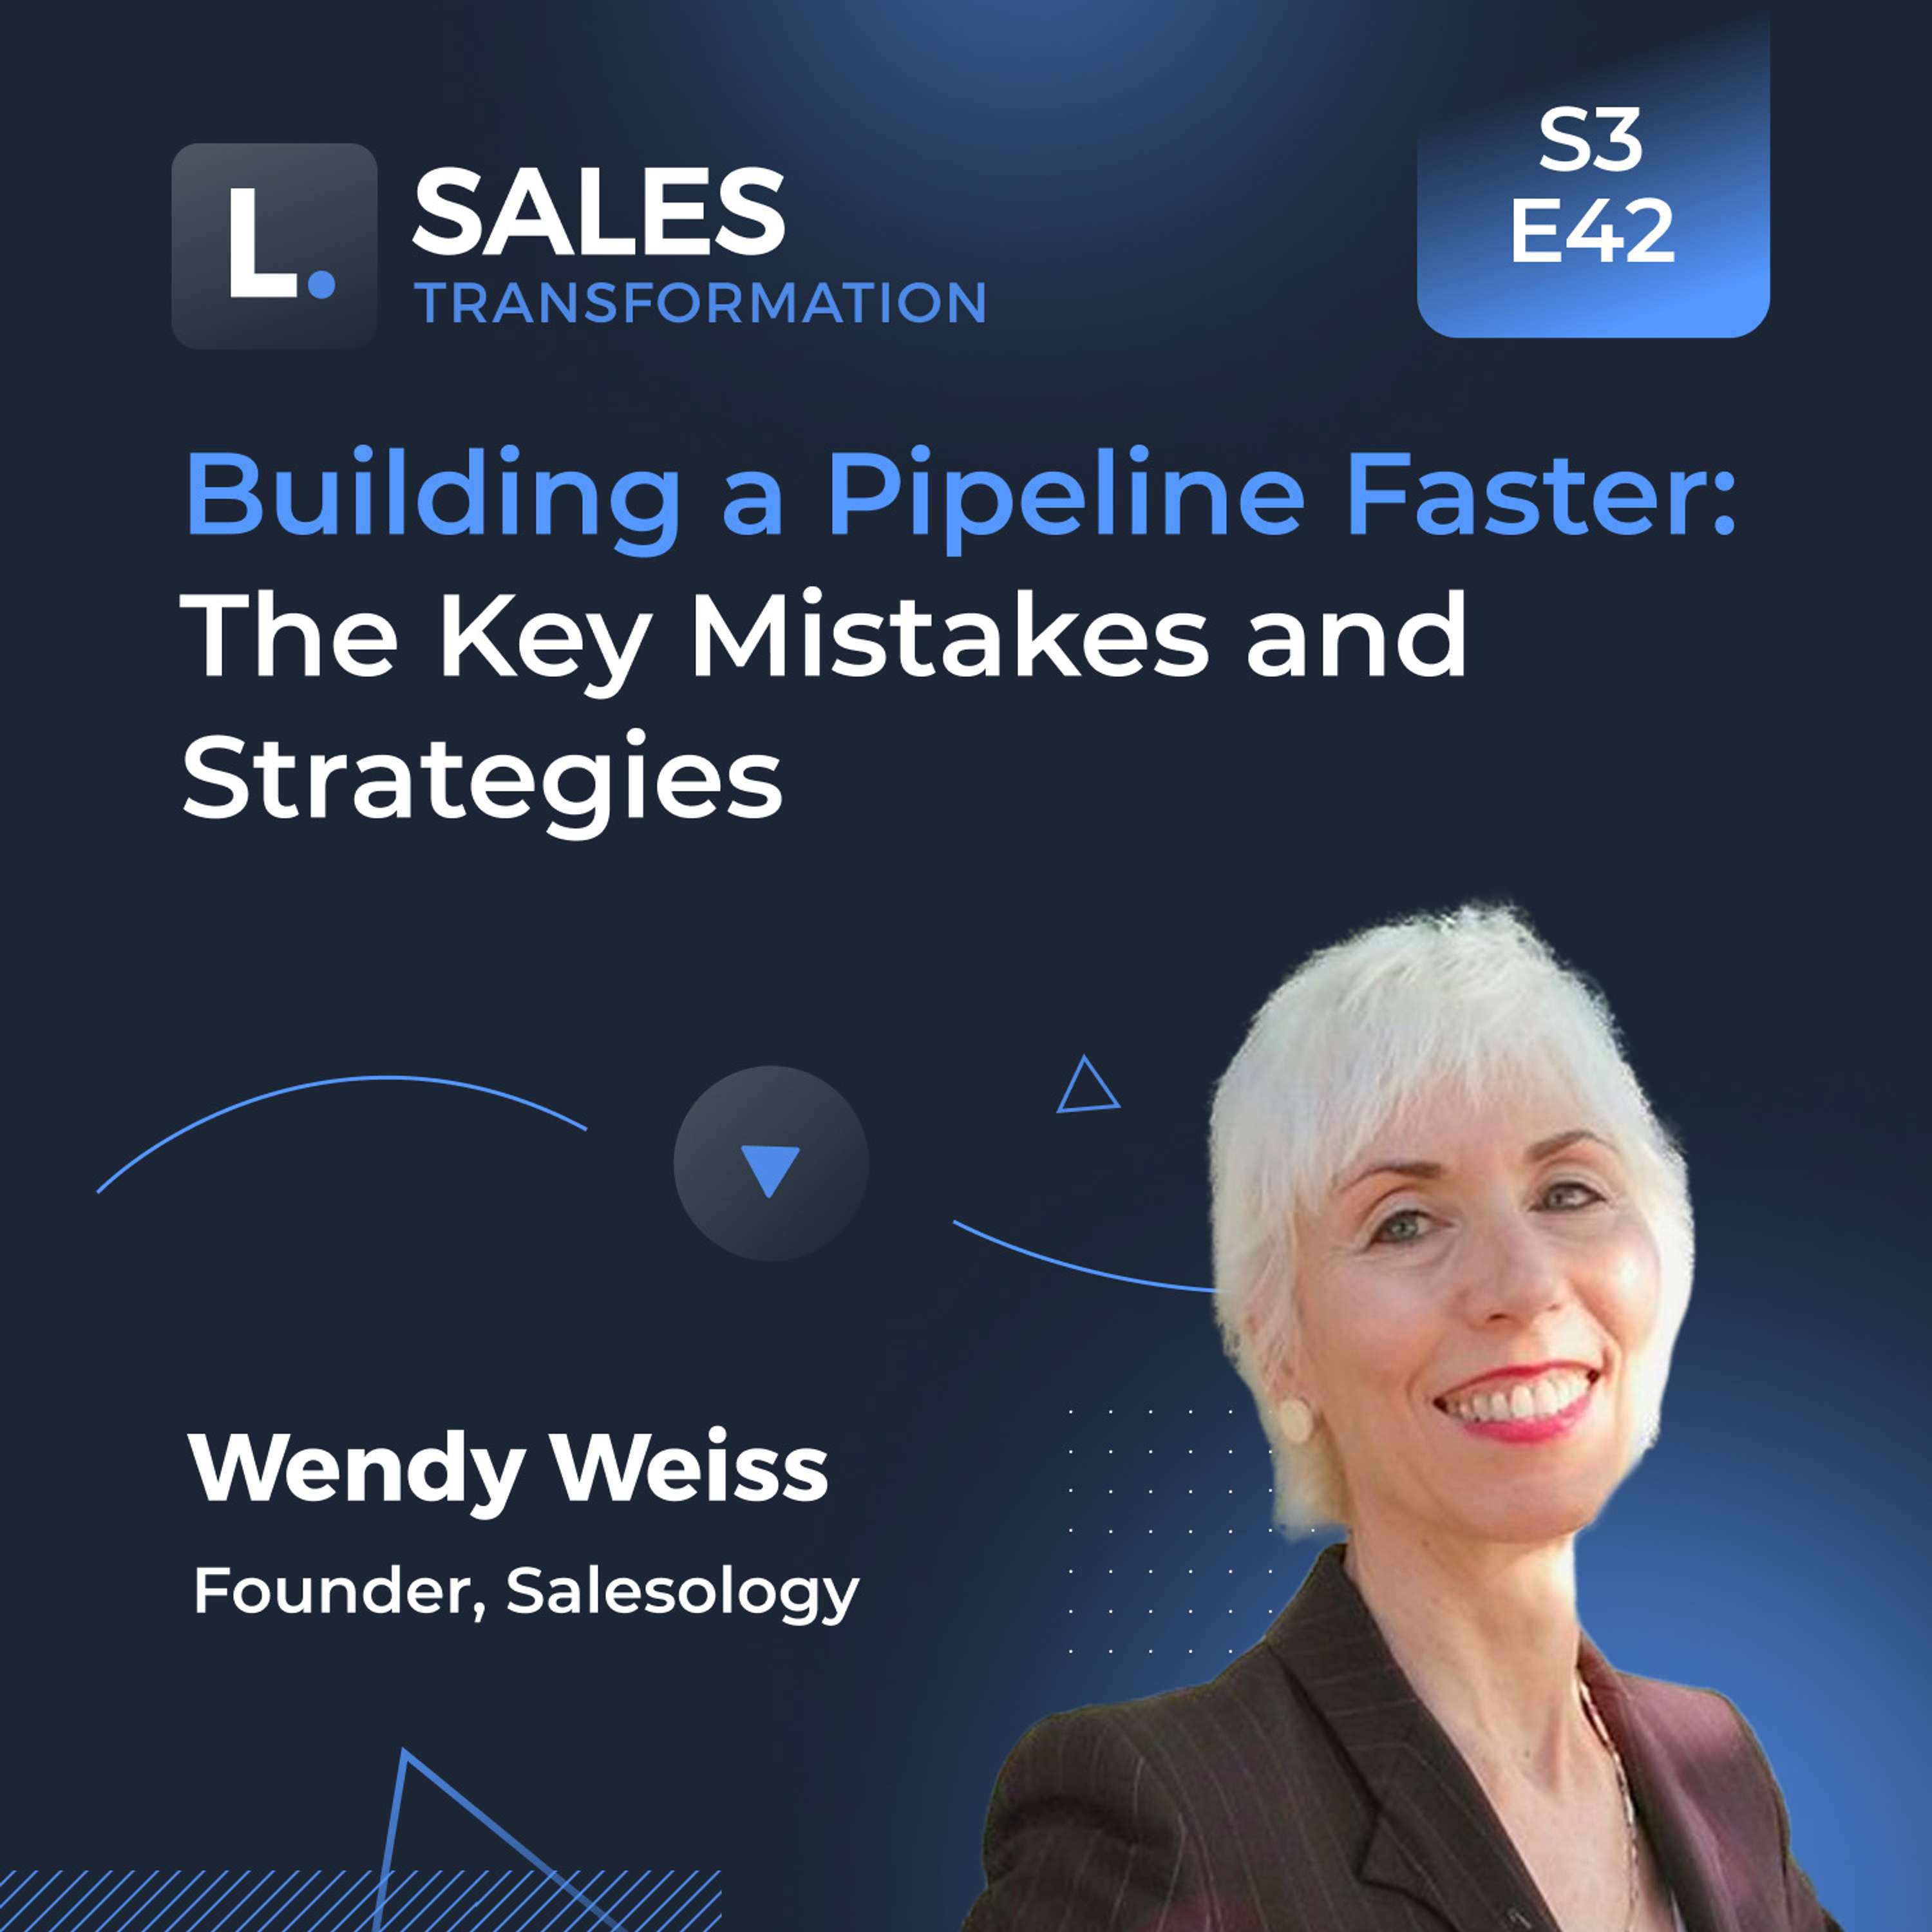 716 - Building a Pipeline Faster: The Key Mistakes and Strategies, with Wendy Weiss